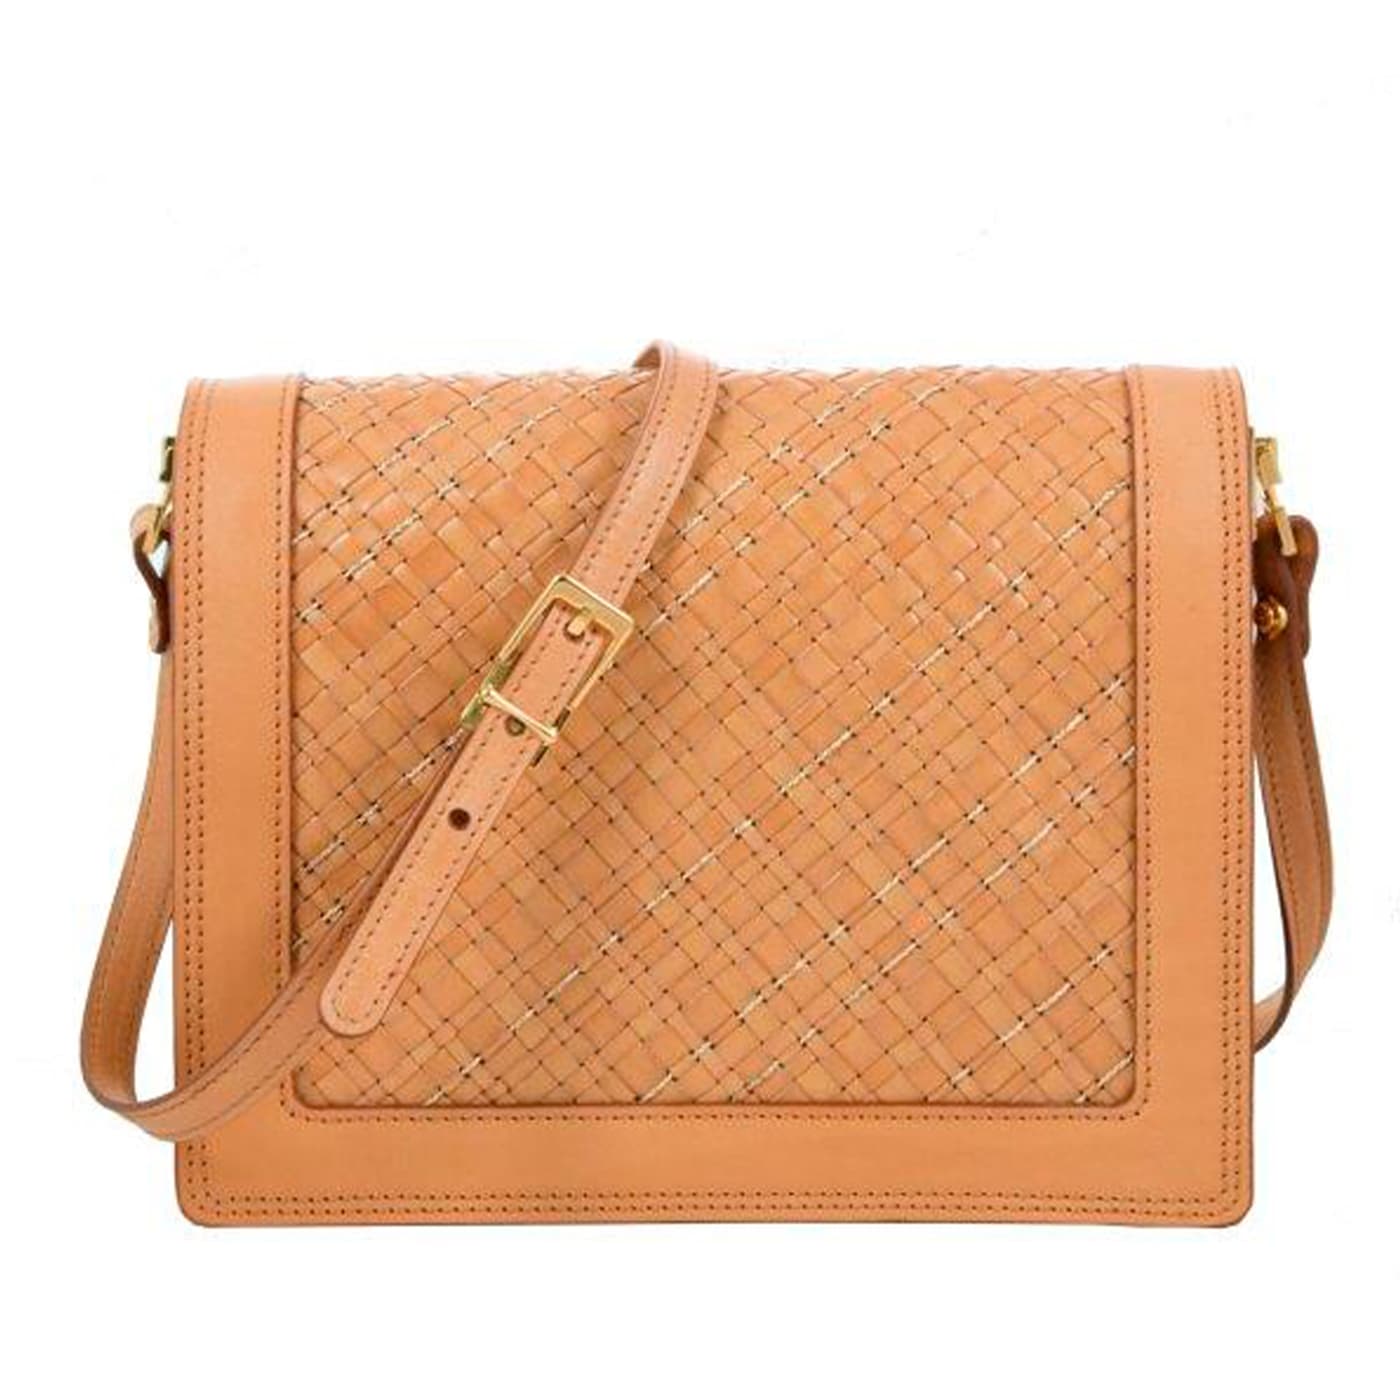 Quadro Braided Leather and Copper Beige Crossbody Bag